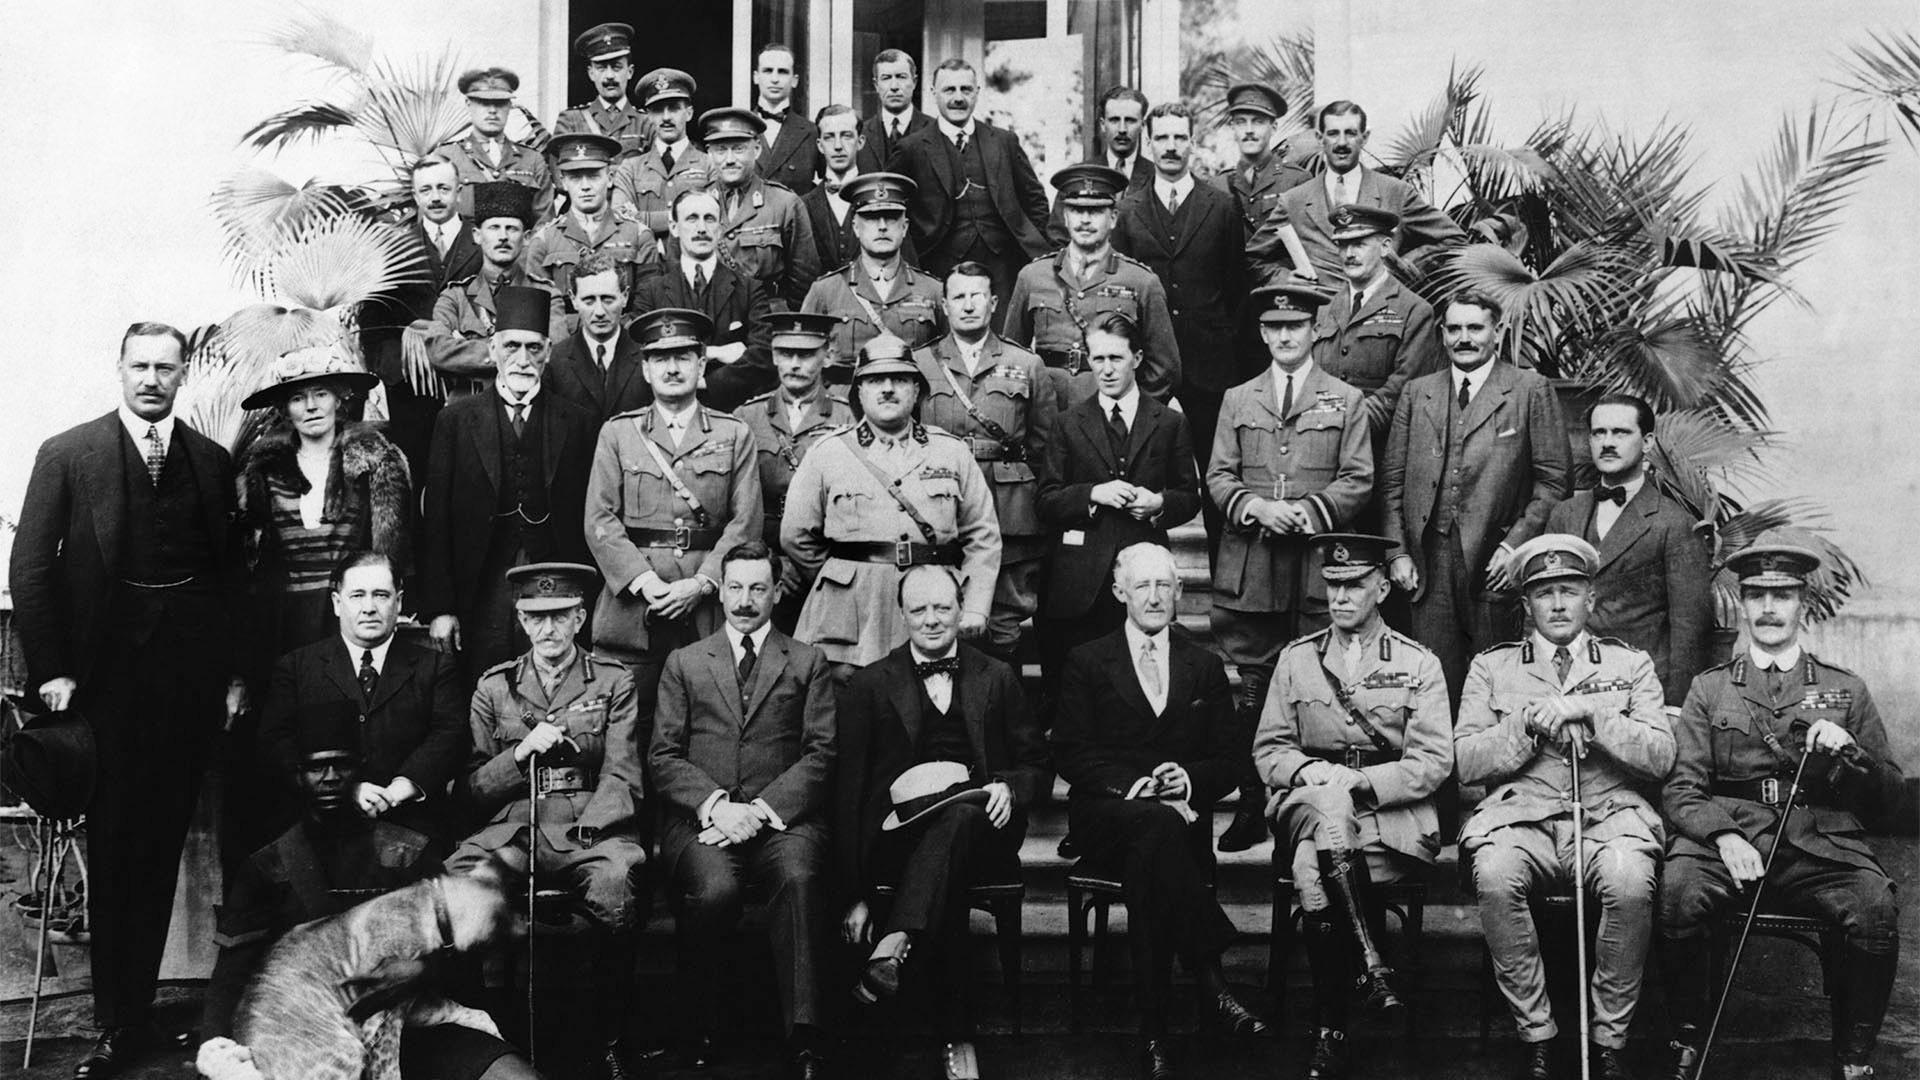 Cairo Conference, 1921, with Gertrude Bell, T.E. Lawrence, and Winston Churchill.